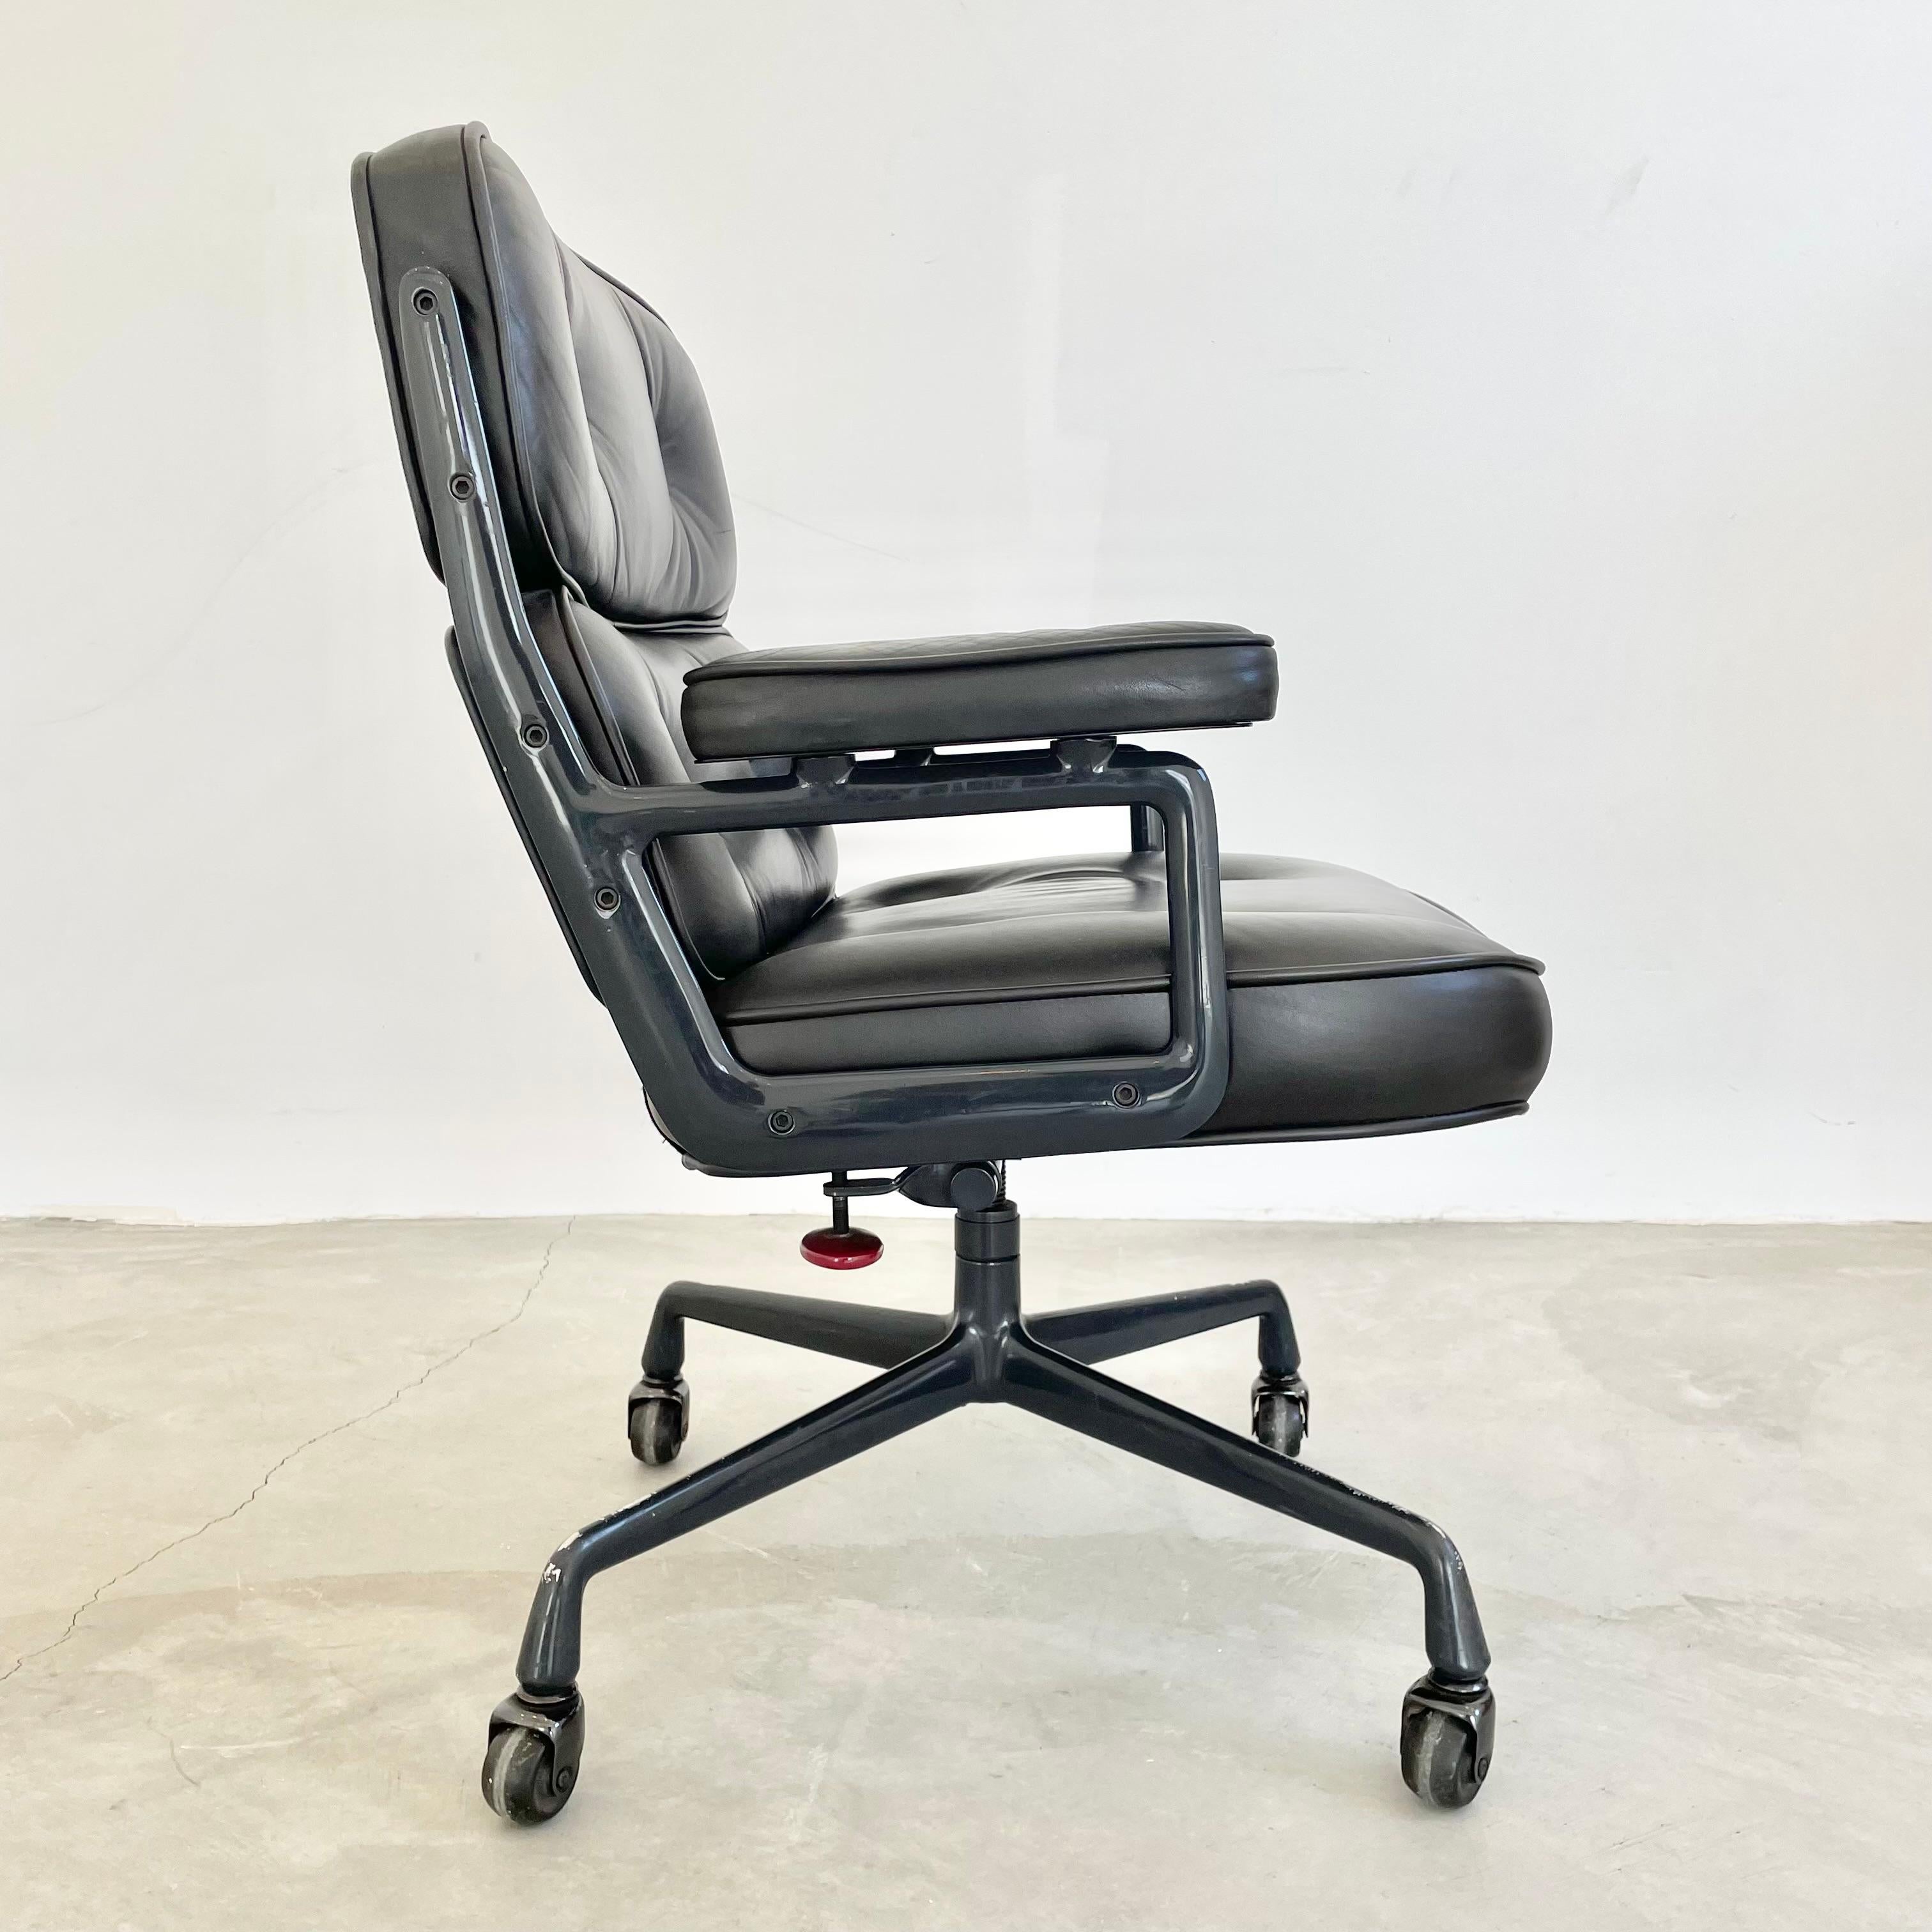 Mid-Century Modern Eames Time Life Chair in Black Leather for Herman Miller, 1984 USA